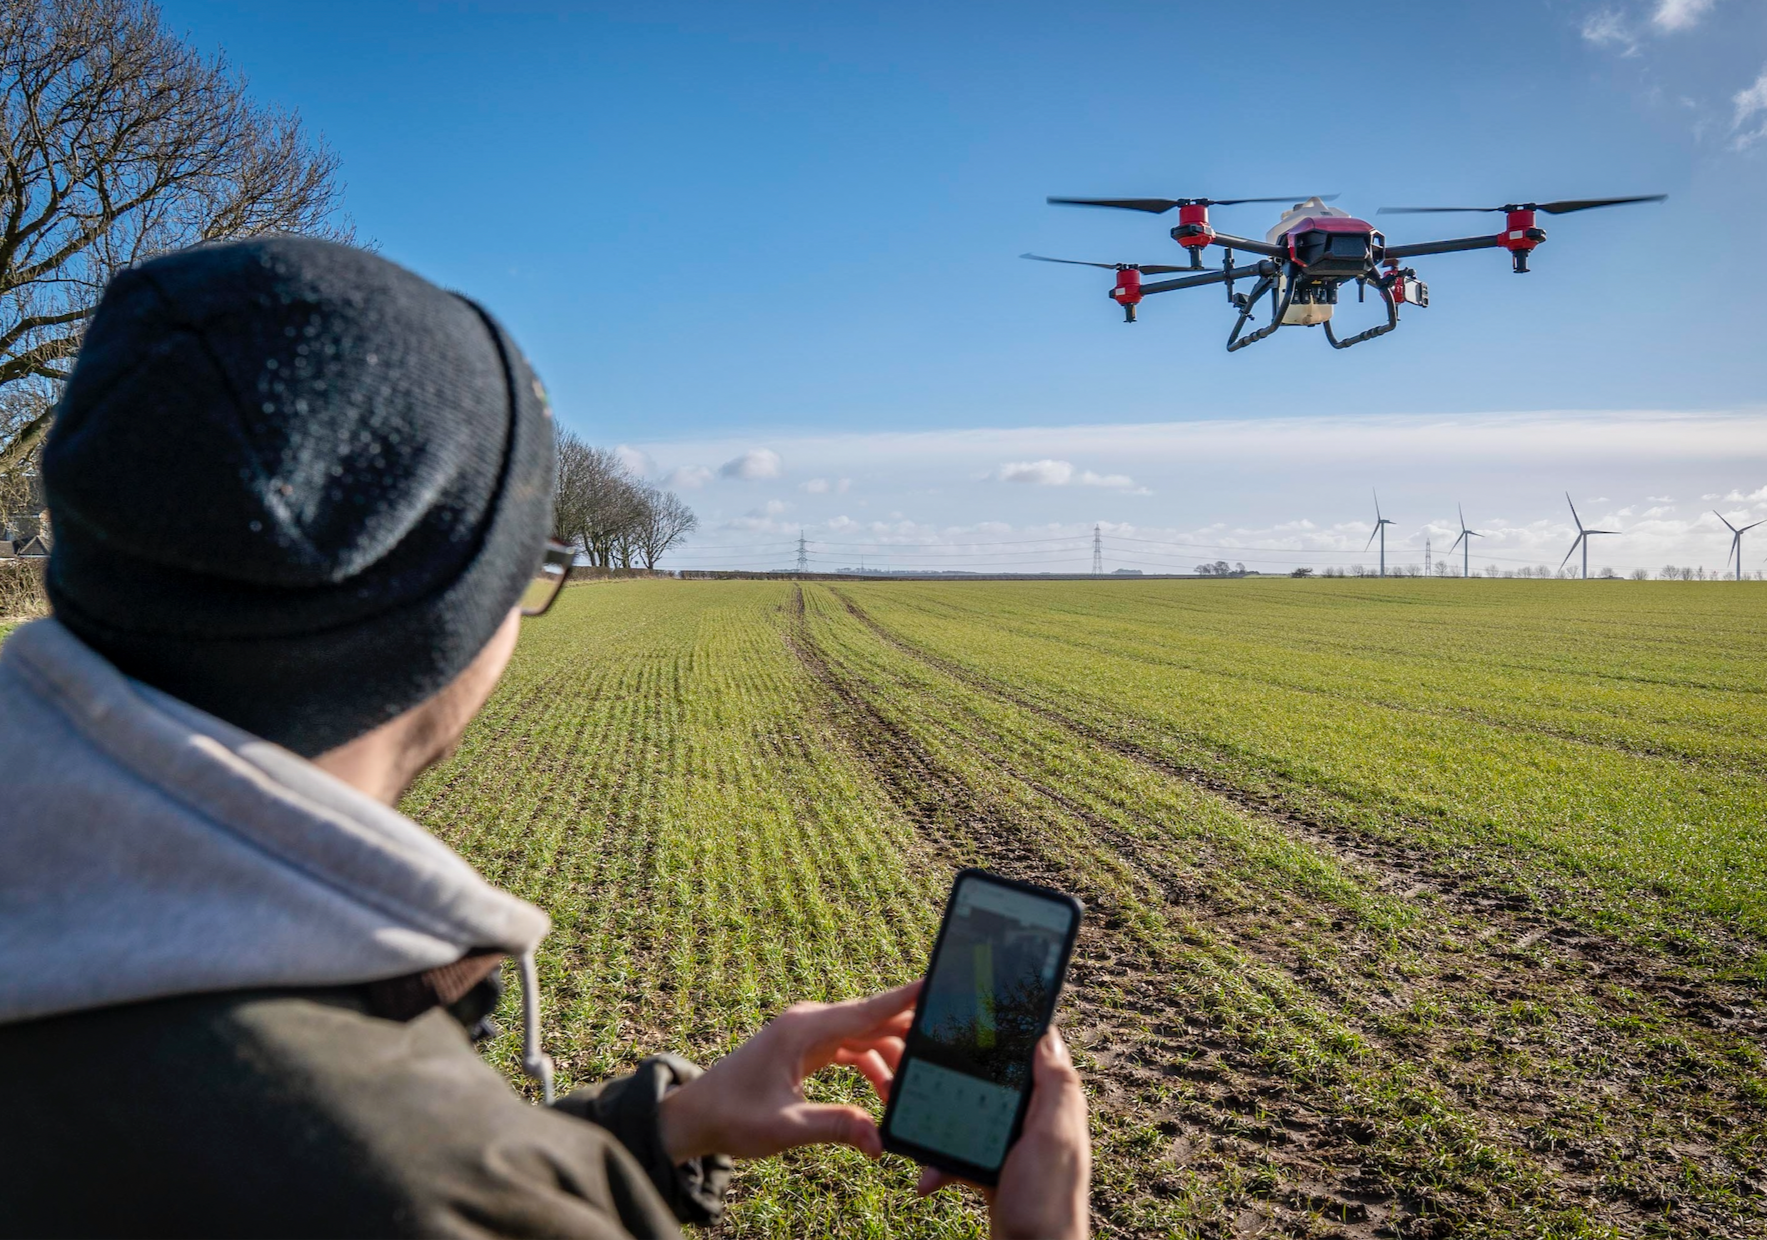 XAG Agriculture Drone is Granted the CAA Operational Authorization to Spray in the UK